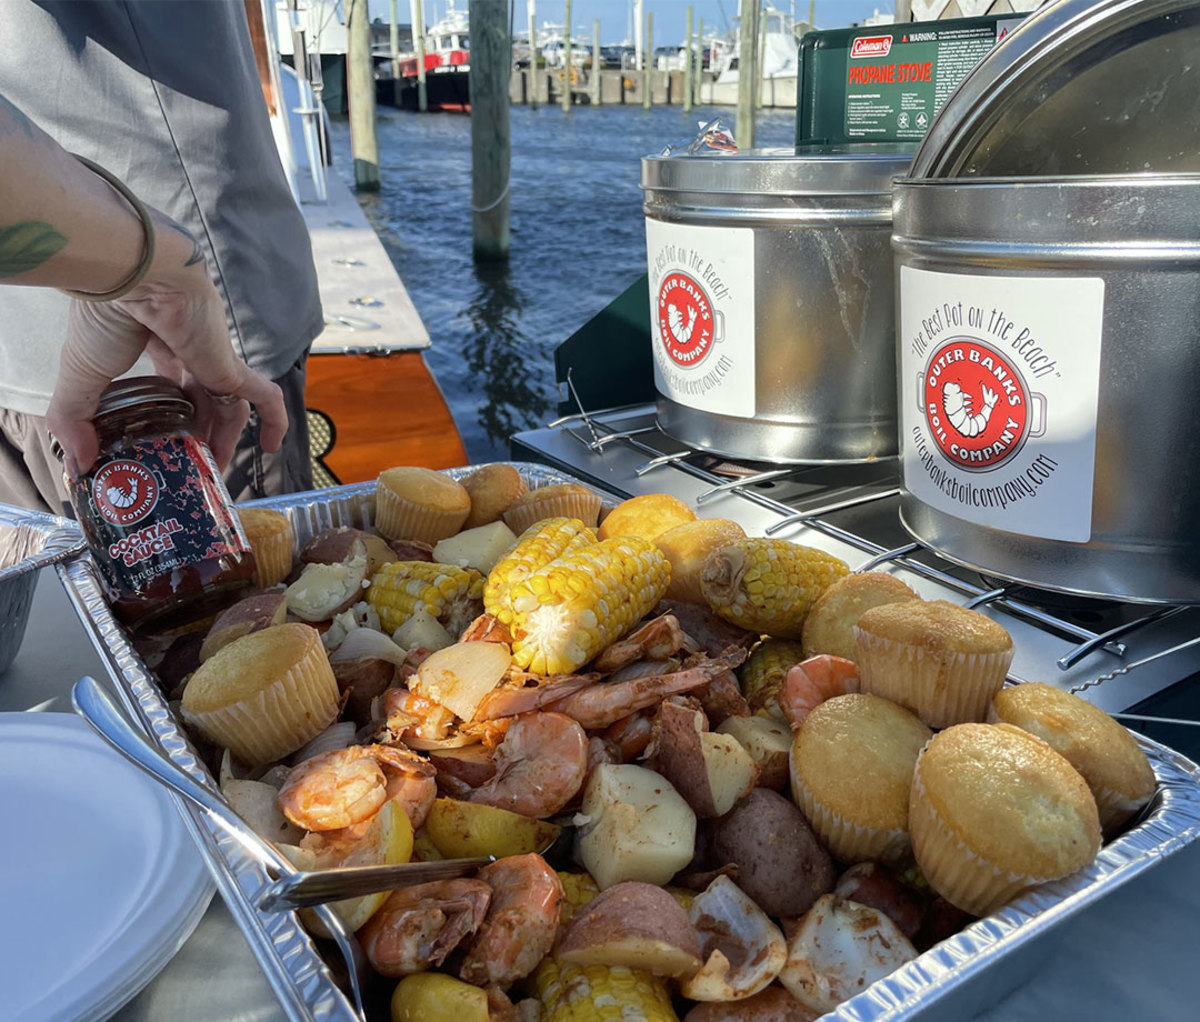 Outer Banks Boil Company